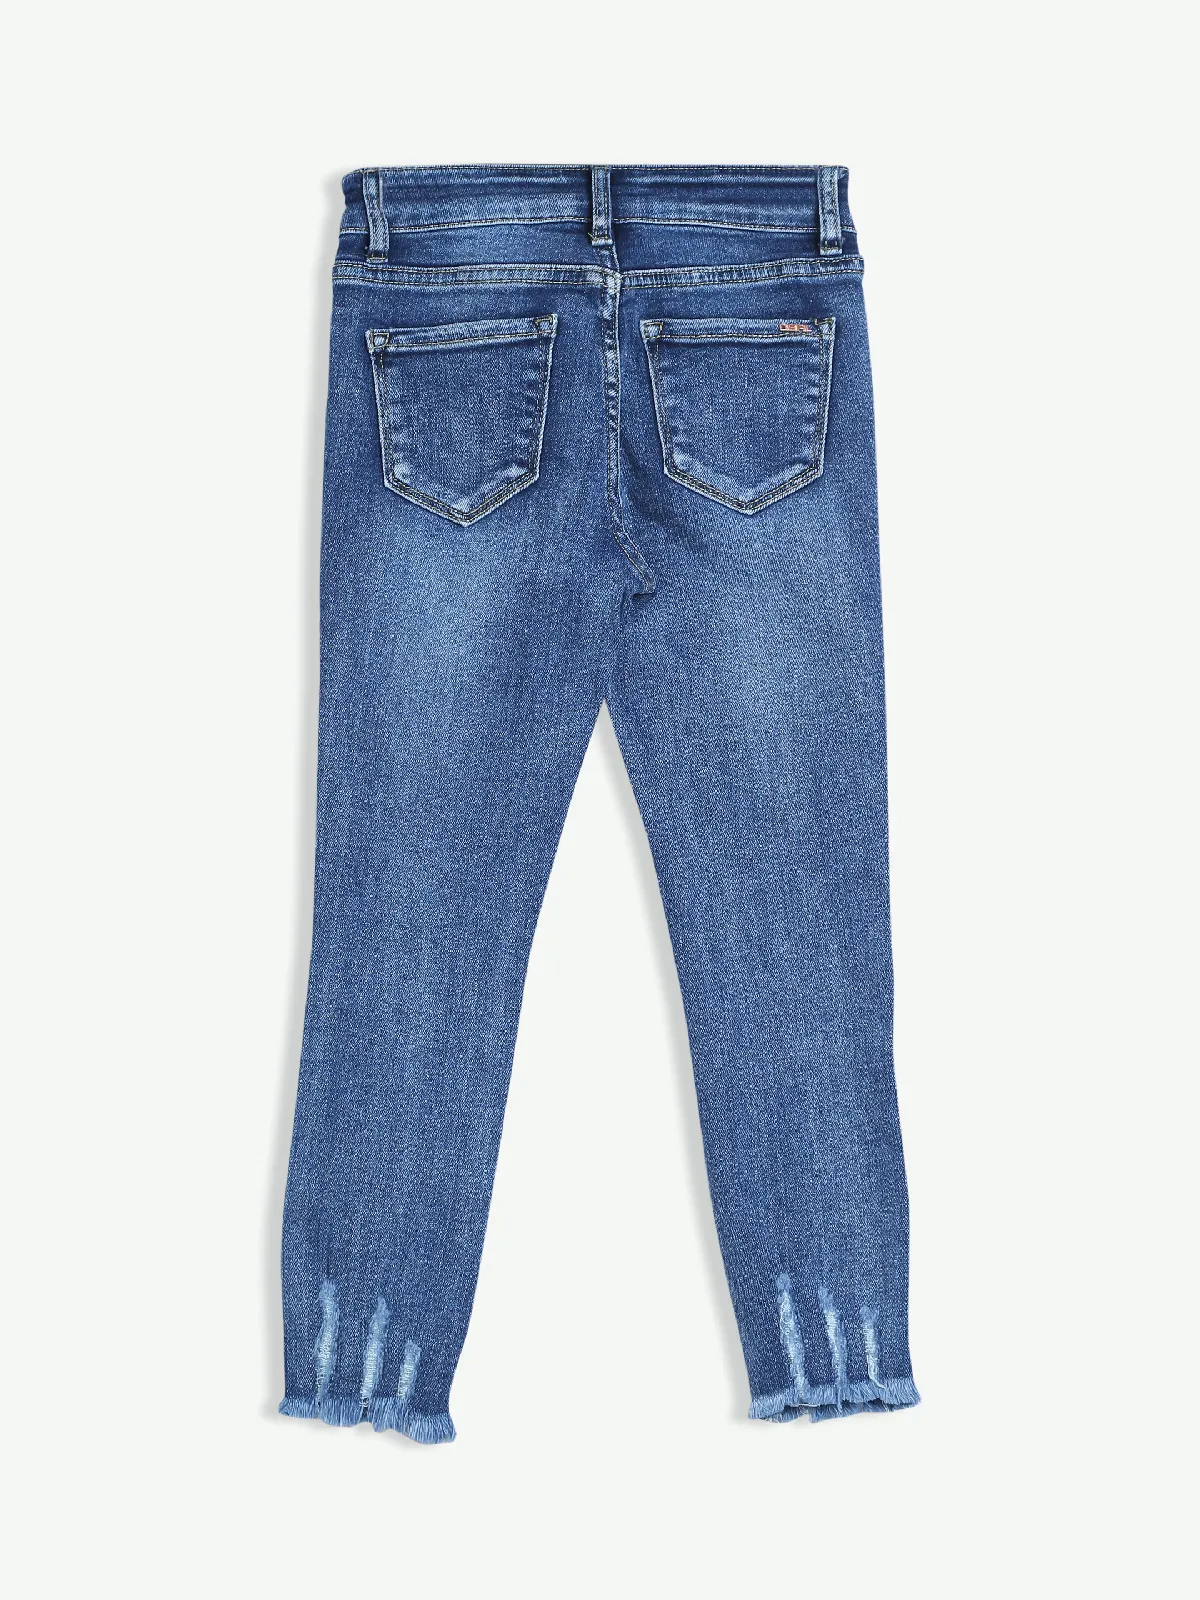 Deal washed navy jeans